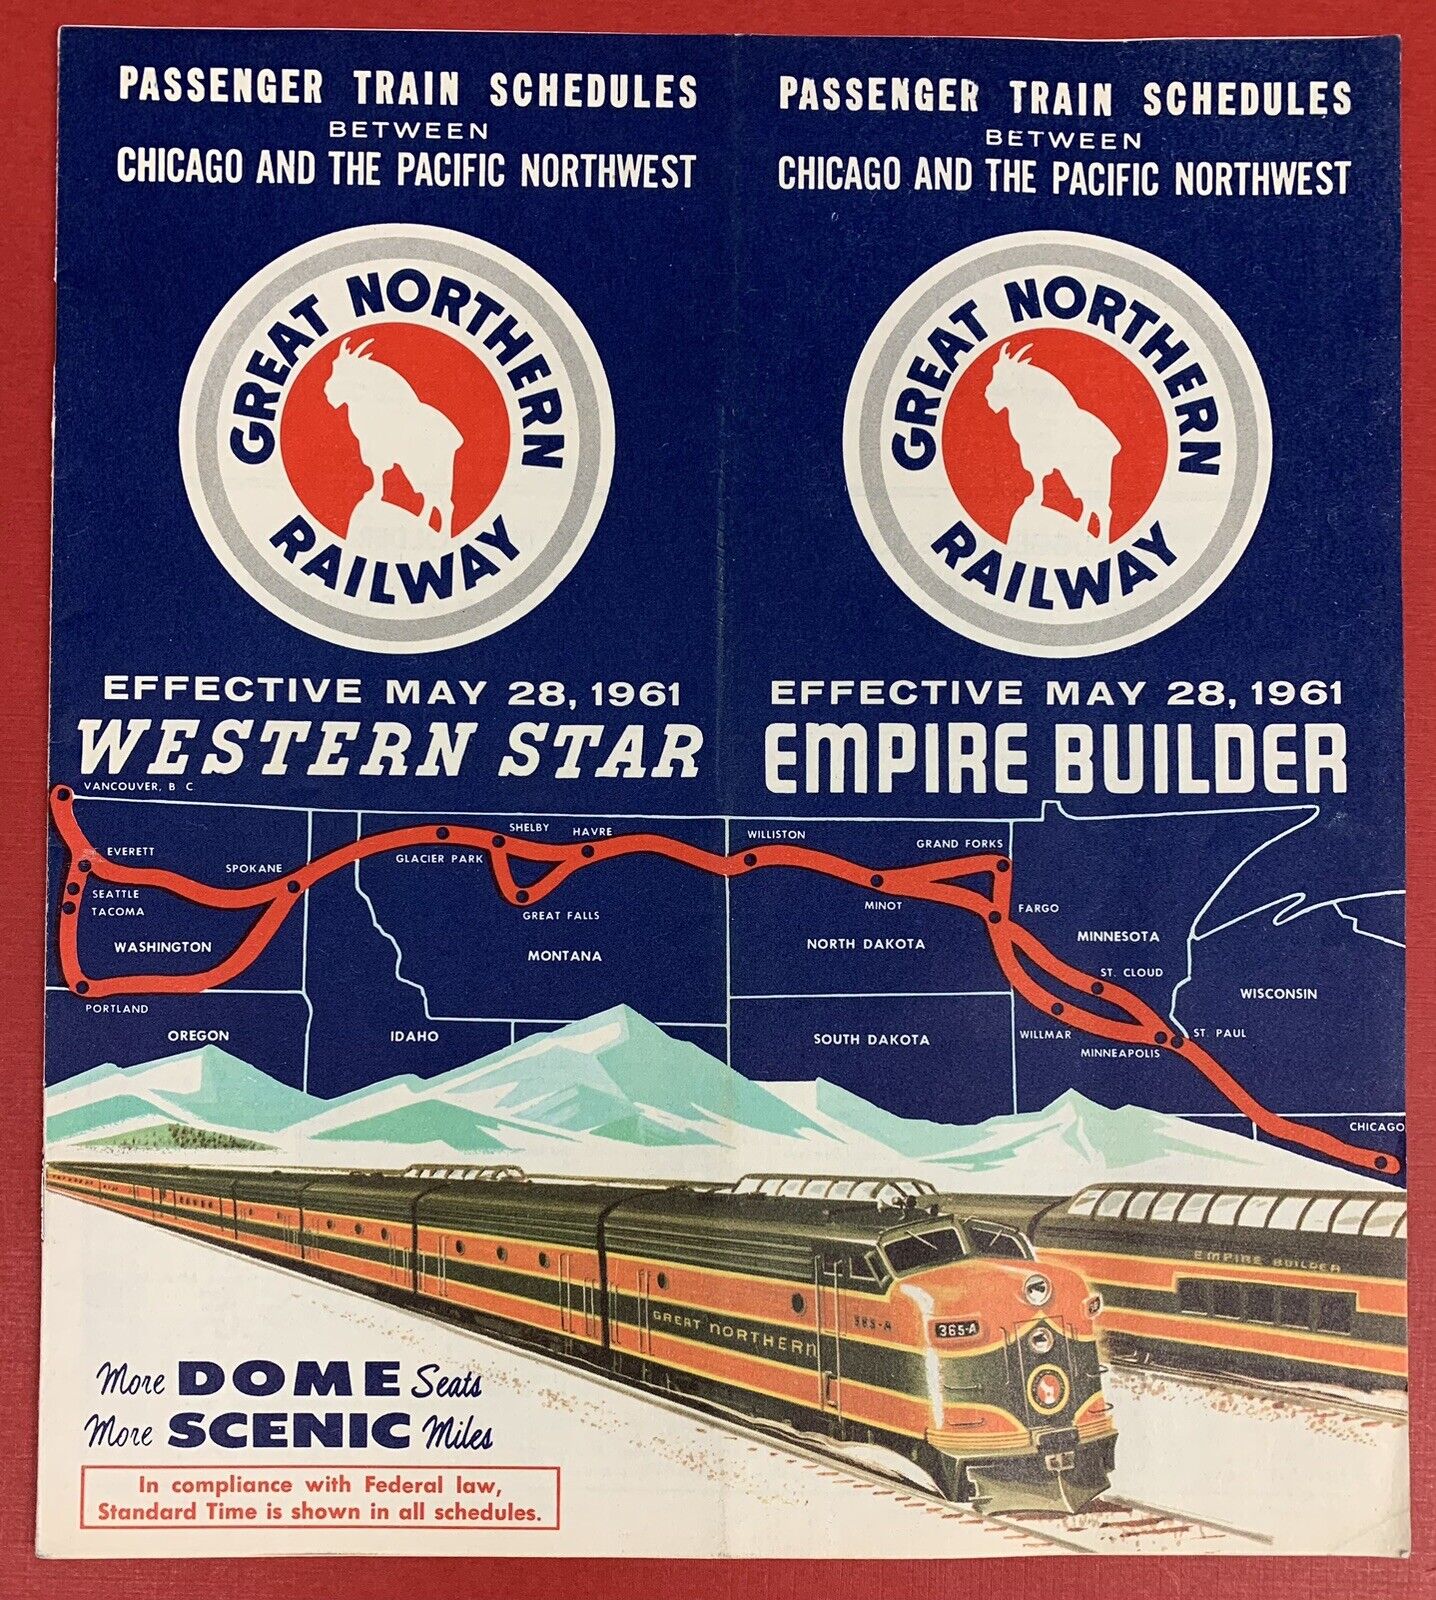 Great Northern Railway, May 28, 1961 Schedule, Chicago and the Pacific Northwest